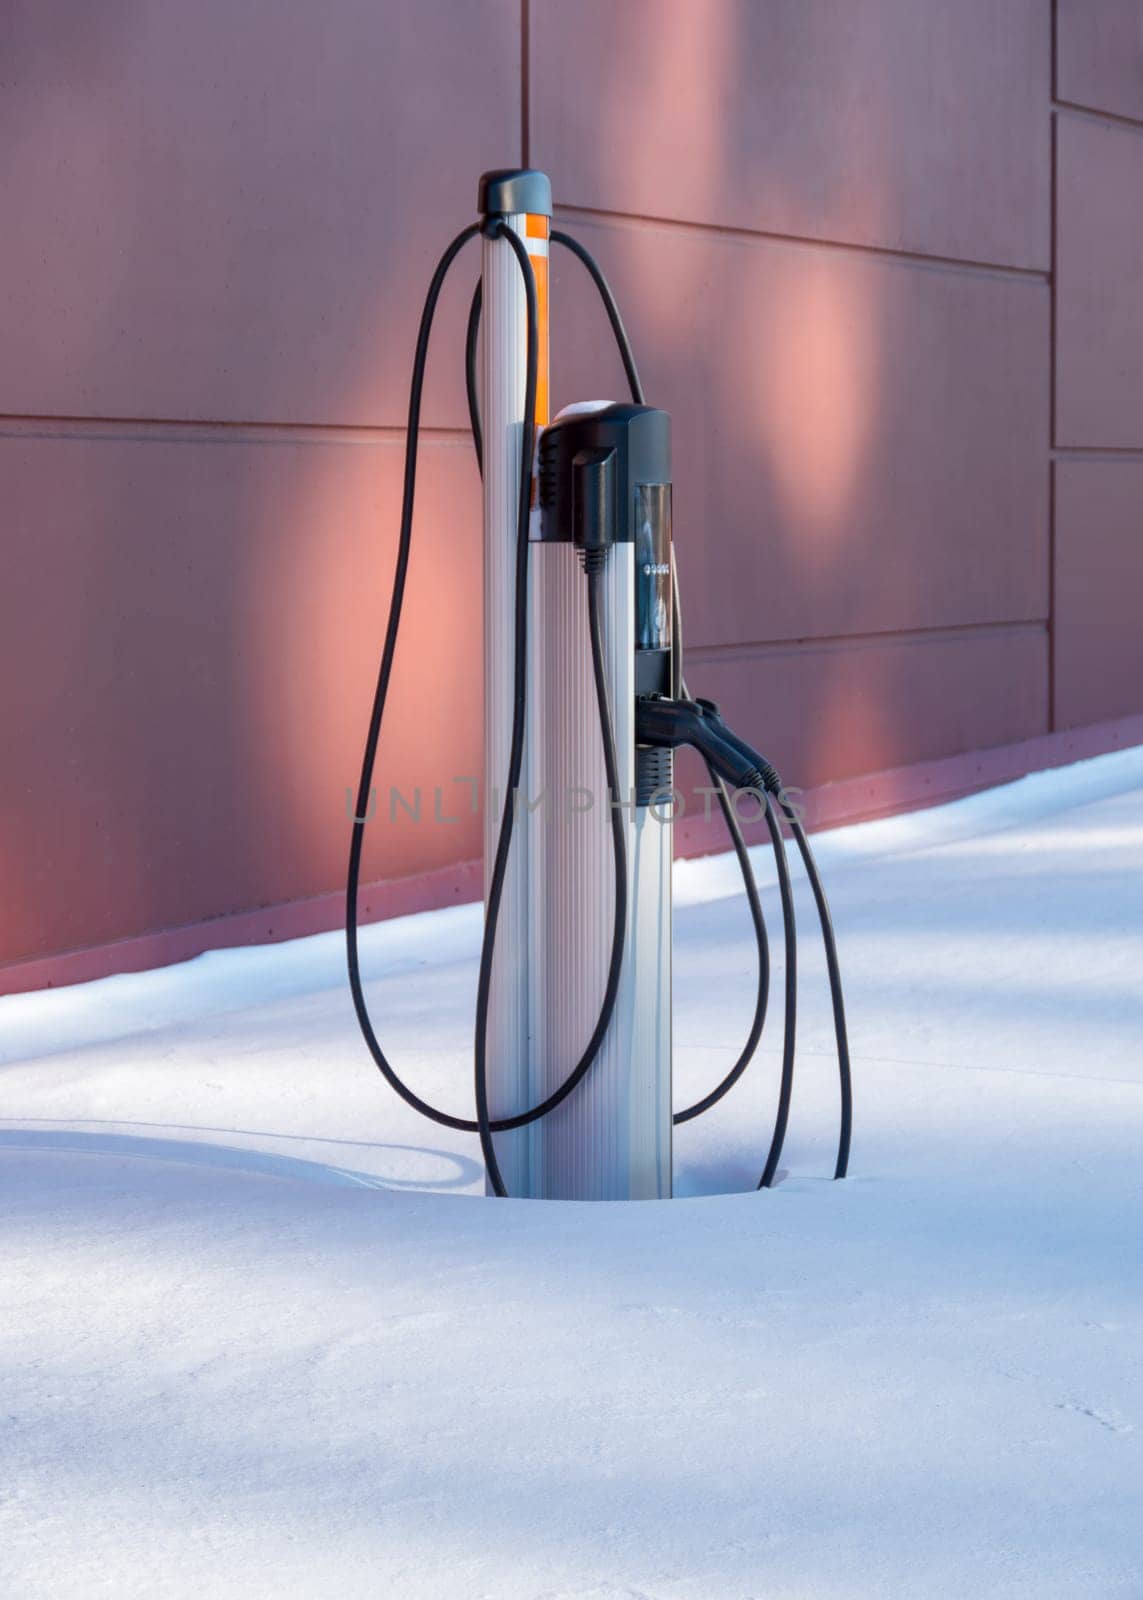 Electric vehicle charging station on winter season. Electric charging point in snow pile